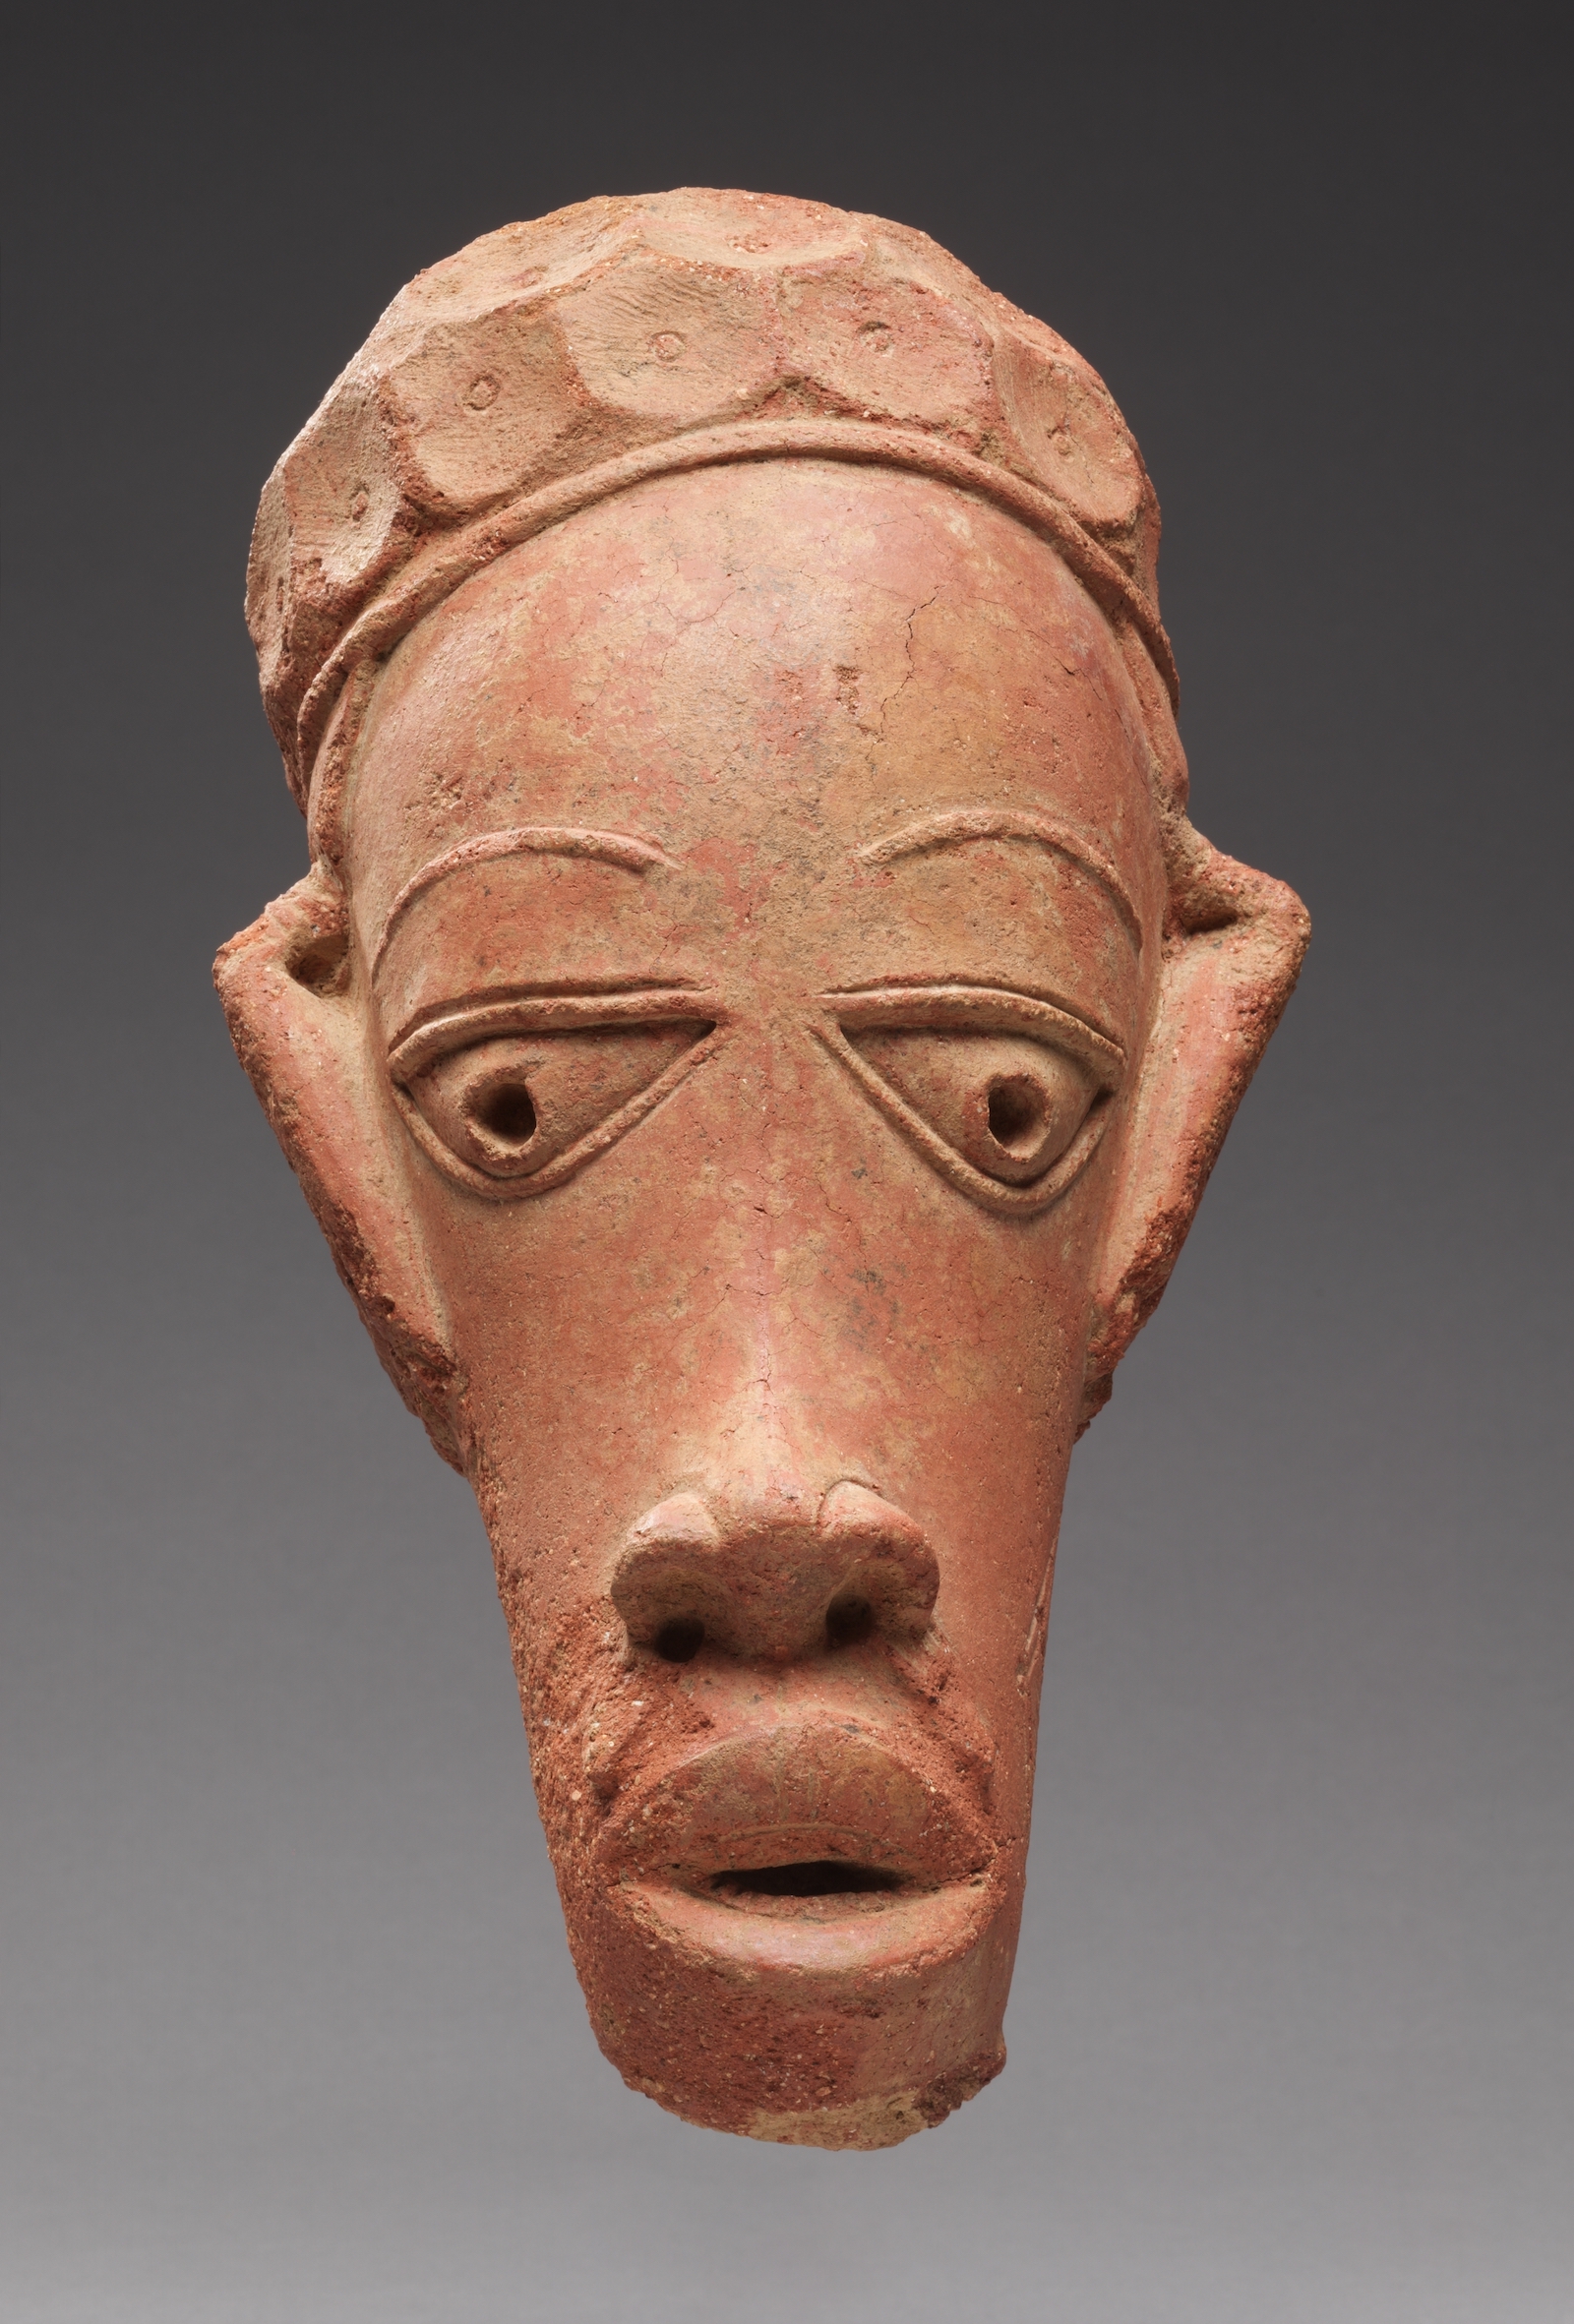 A Nok-style terracotta head, c. AD 20-620. The Cleveland Museum of Art. Andrew R. and Martha Holden Jennings Fund. Public Domain.